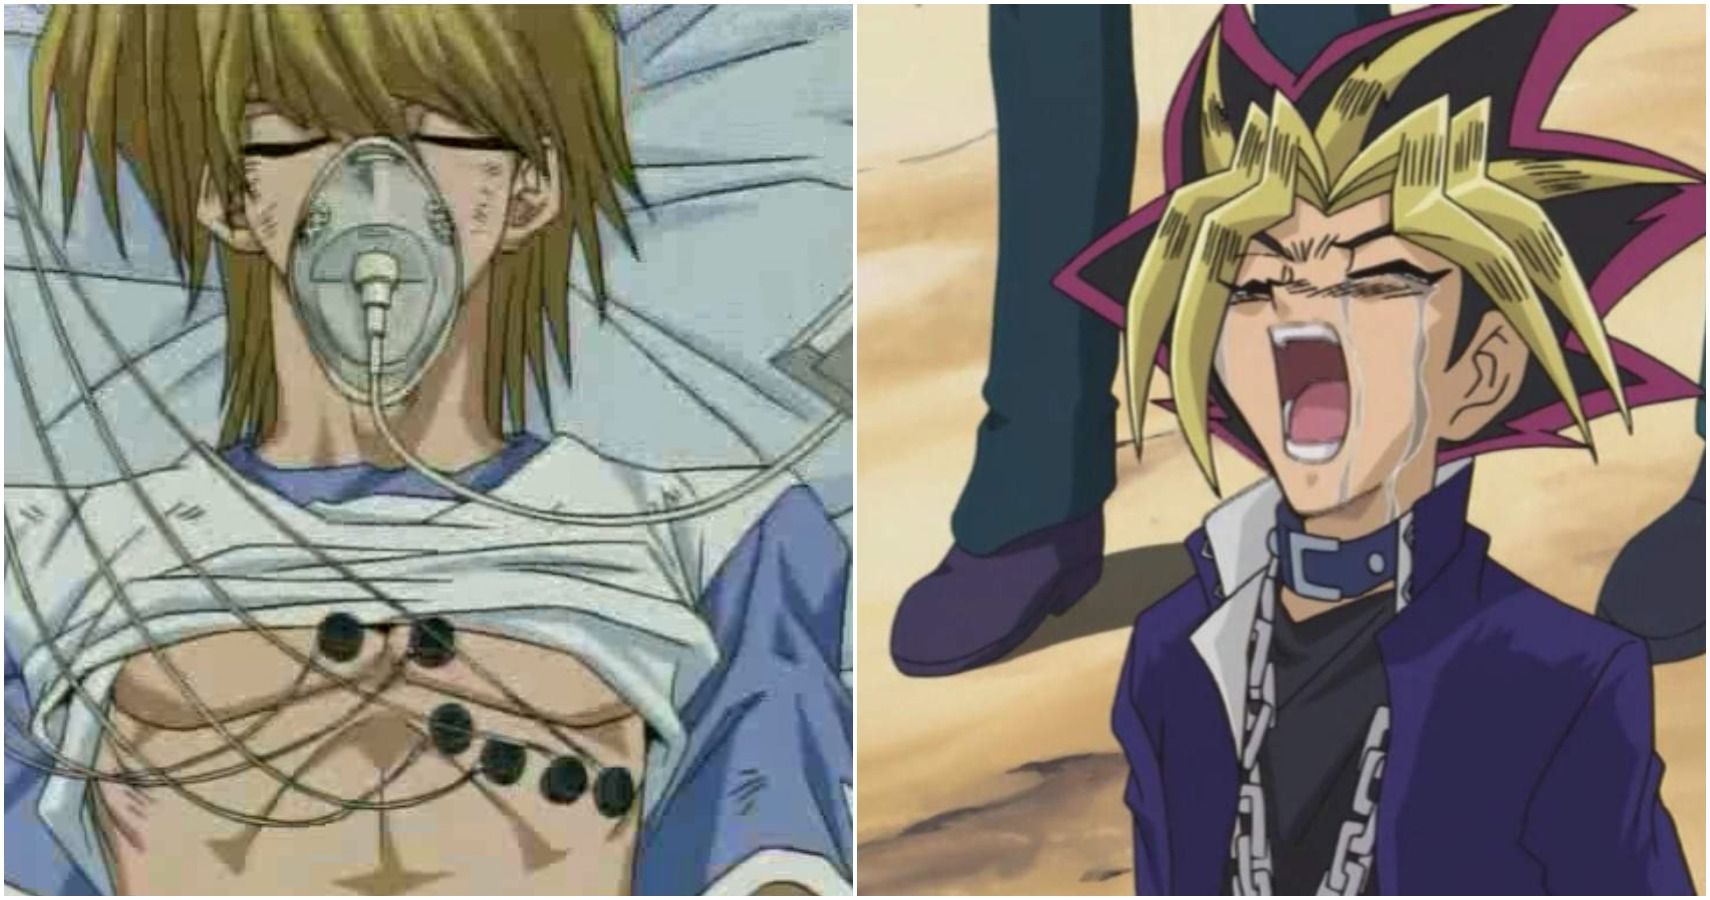 The Yu-Gi-Oh franchise has some really great heartbreaking deaths